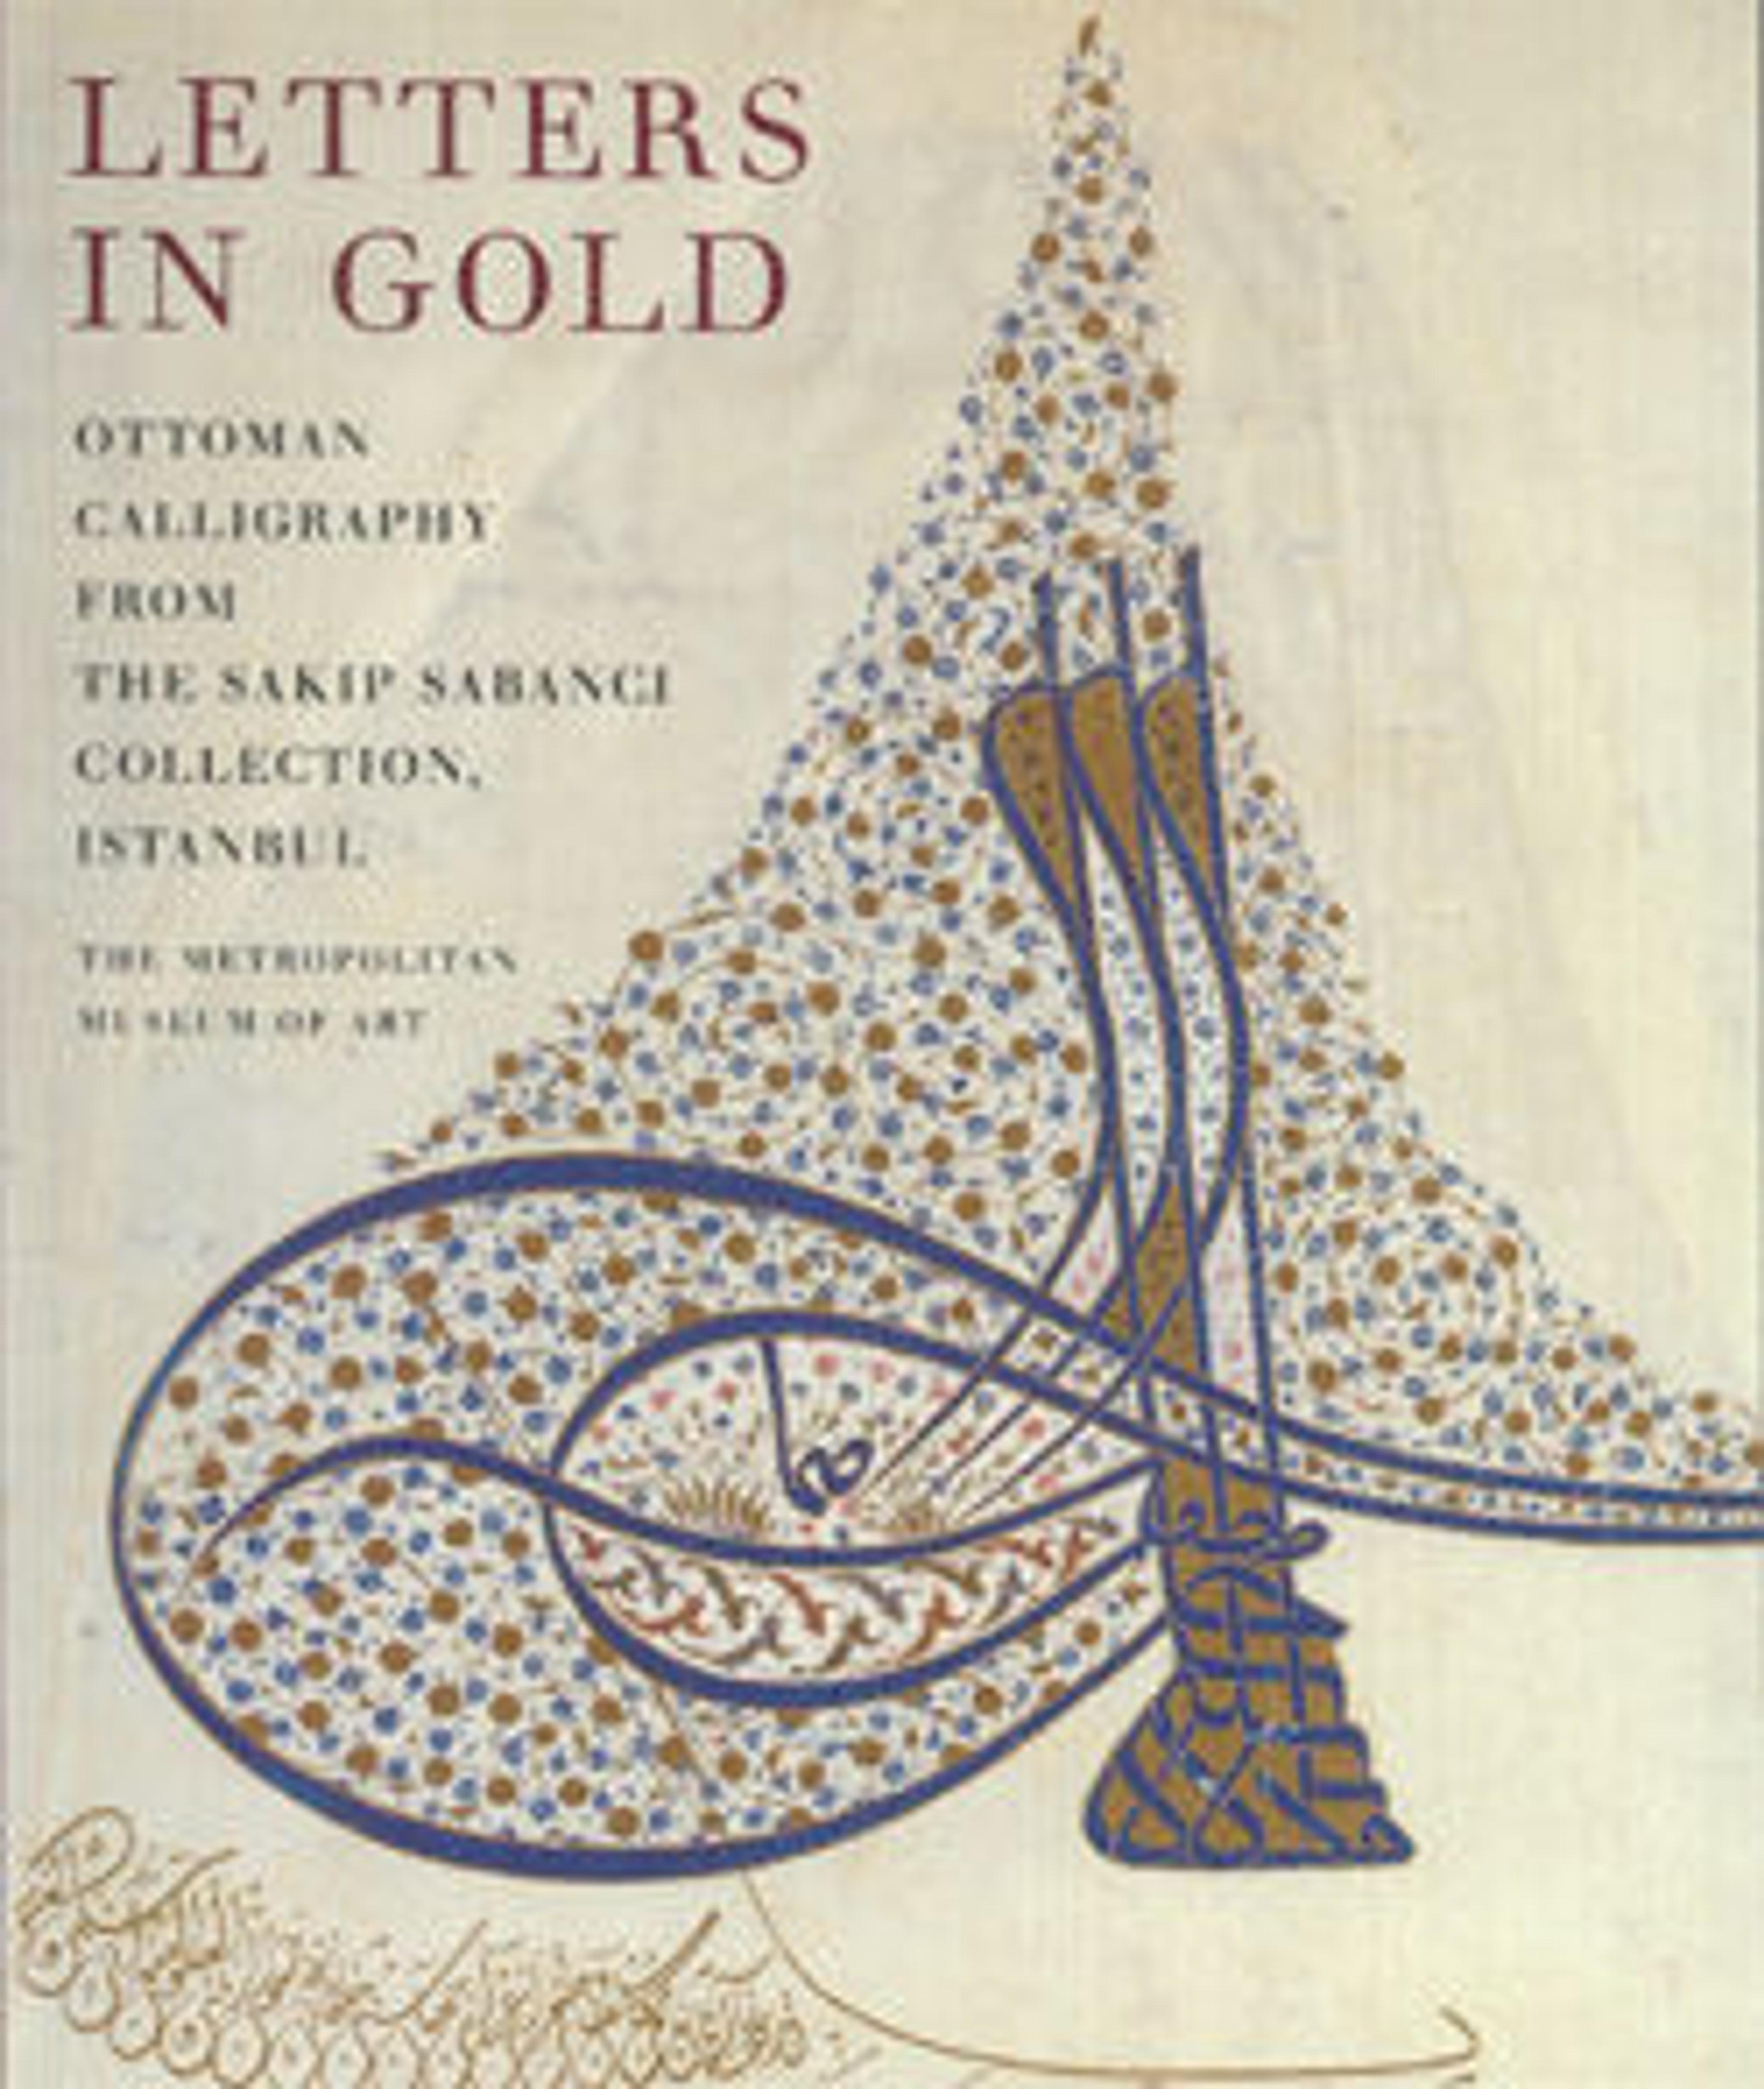 Letters in Gold: Ottoman Calligraphy from the Sakip Sabanci Collection, Istanbul